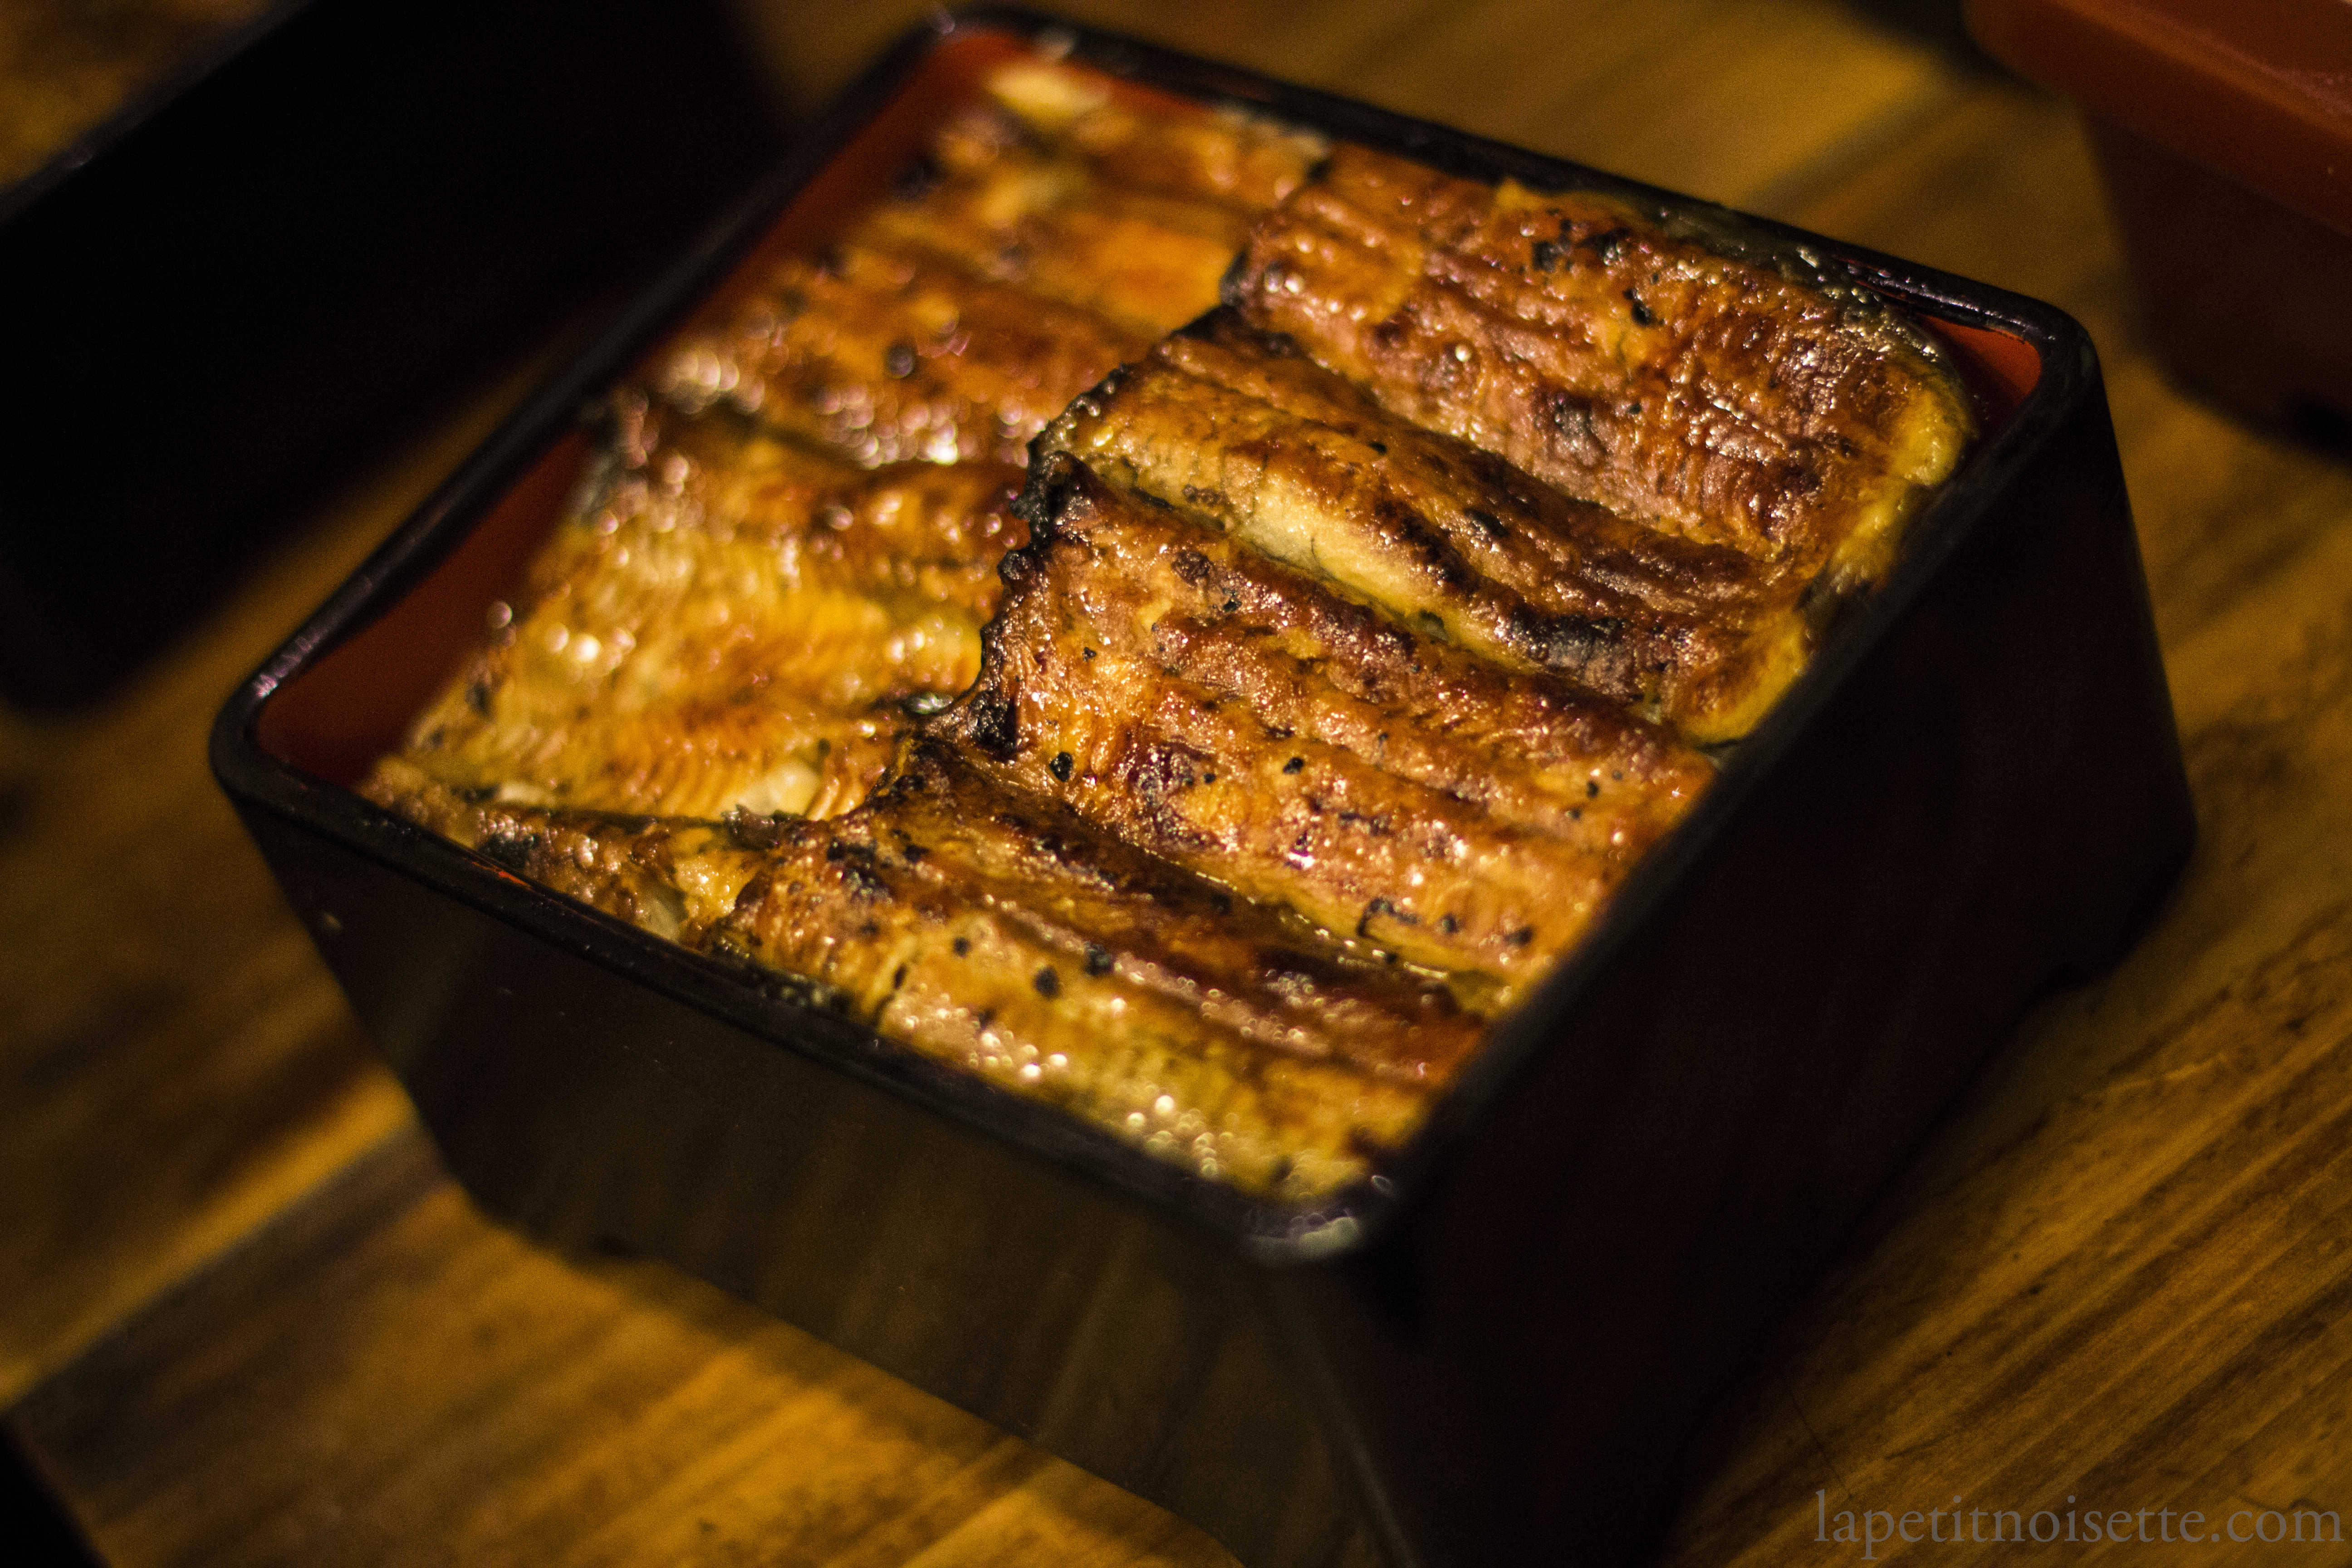 Japanese grilled eel over rice.